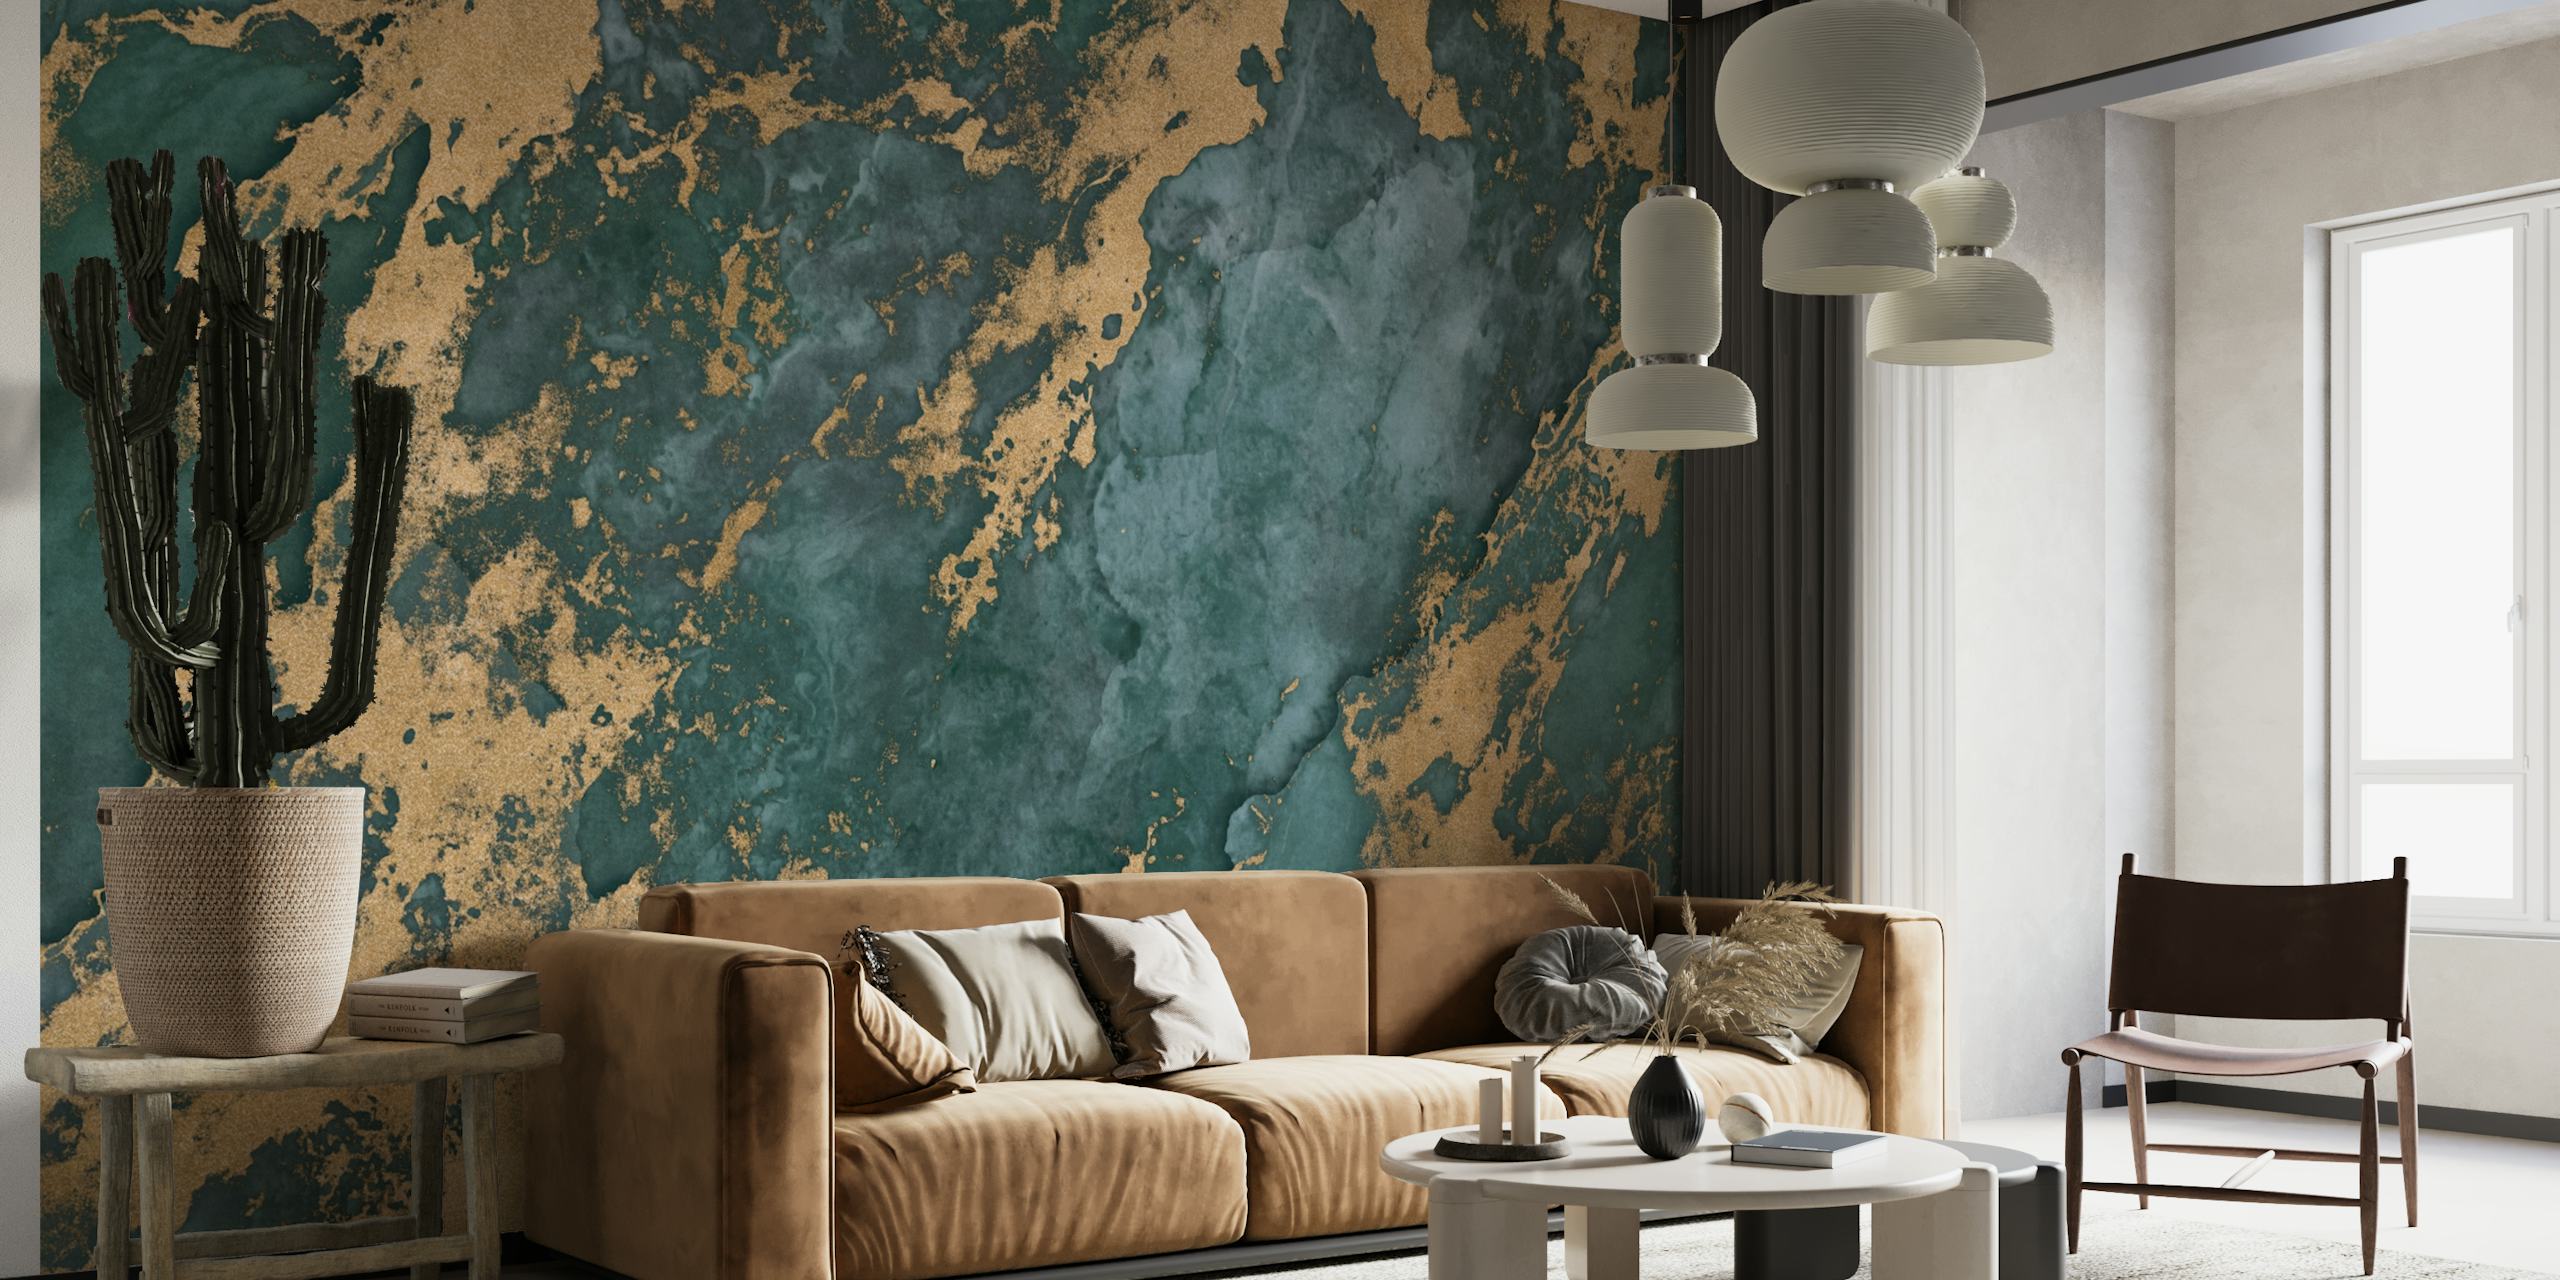 Mineral Marble Texture Teal Gold tapete